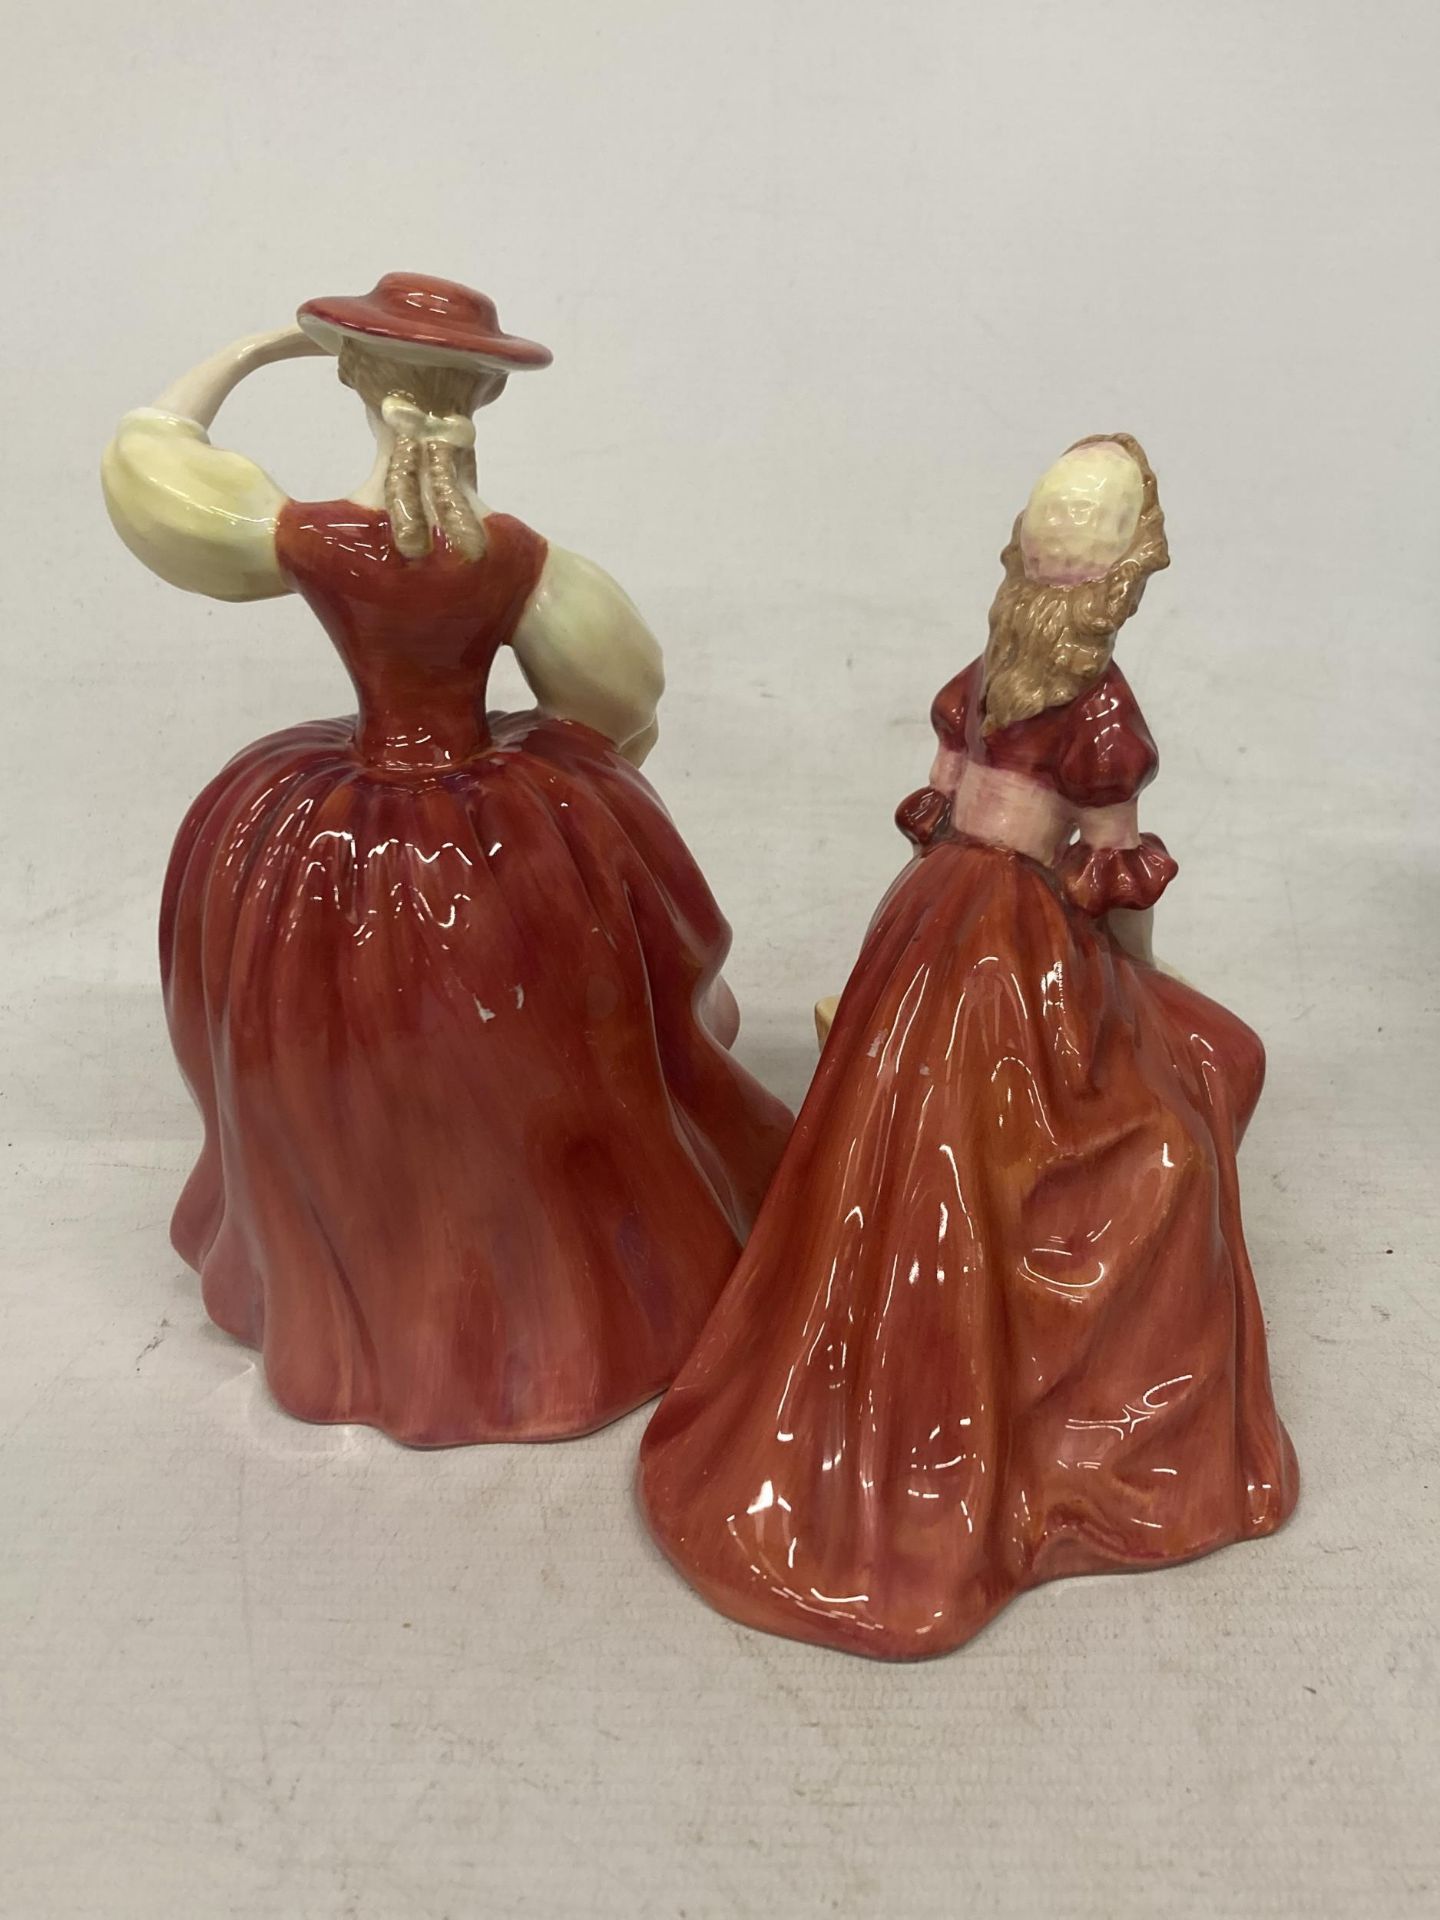 TWO ROYAL DOULTON FIGURINES "BUTTERCUP" AND "JUDITH" - Image 3 of 4